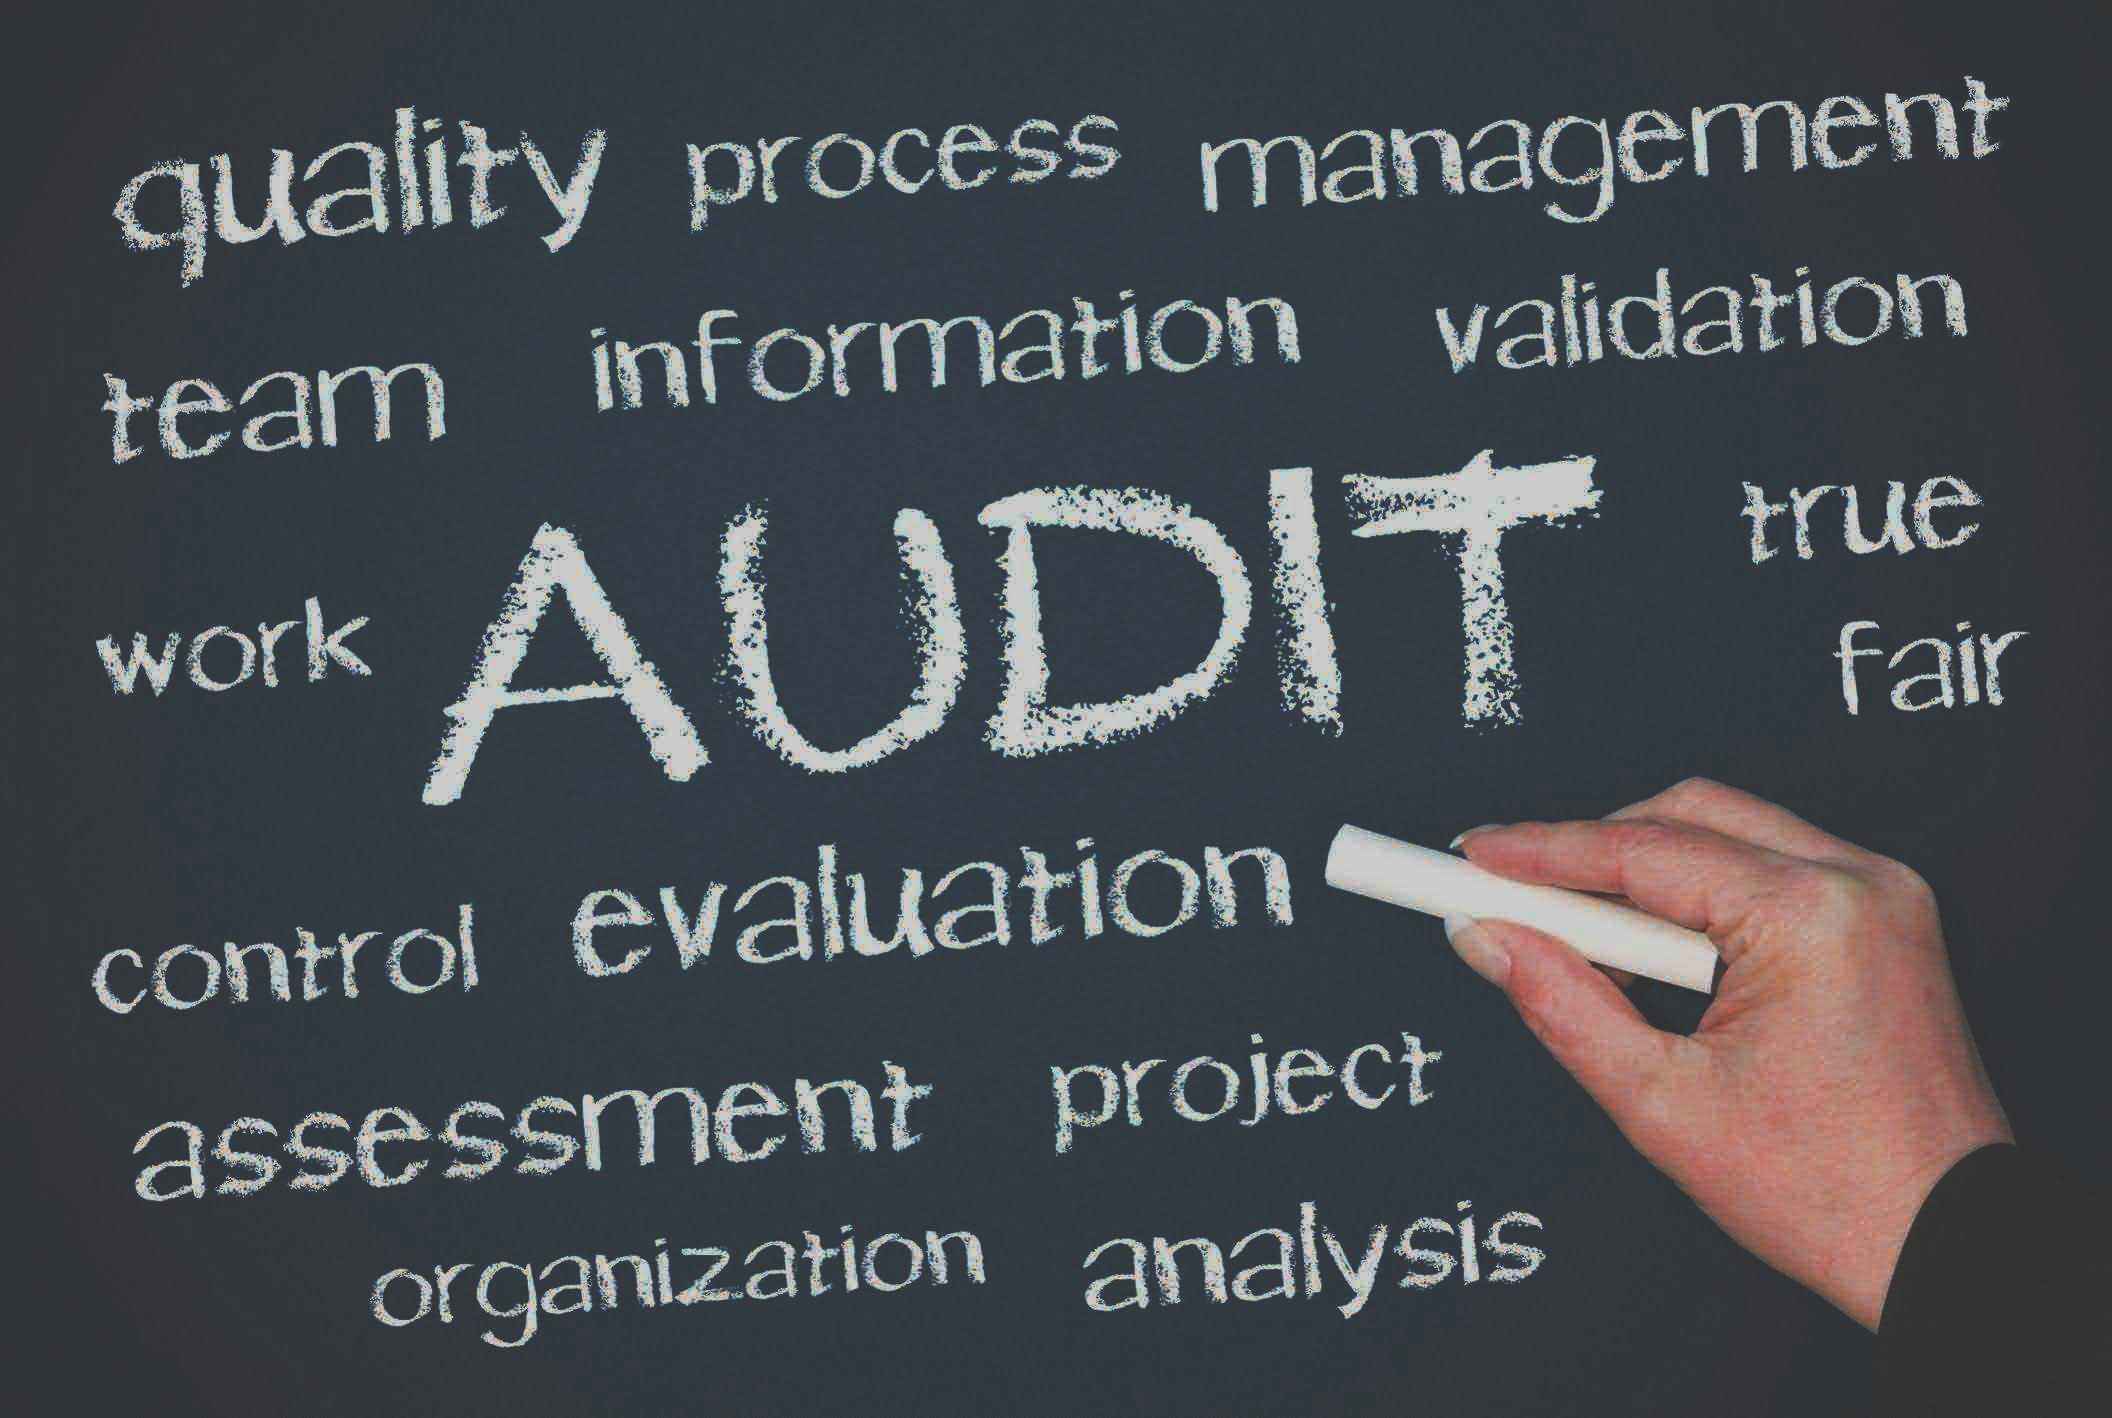 China Factory Audit Checklist